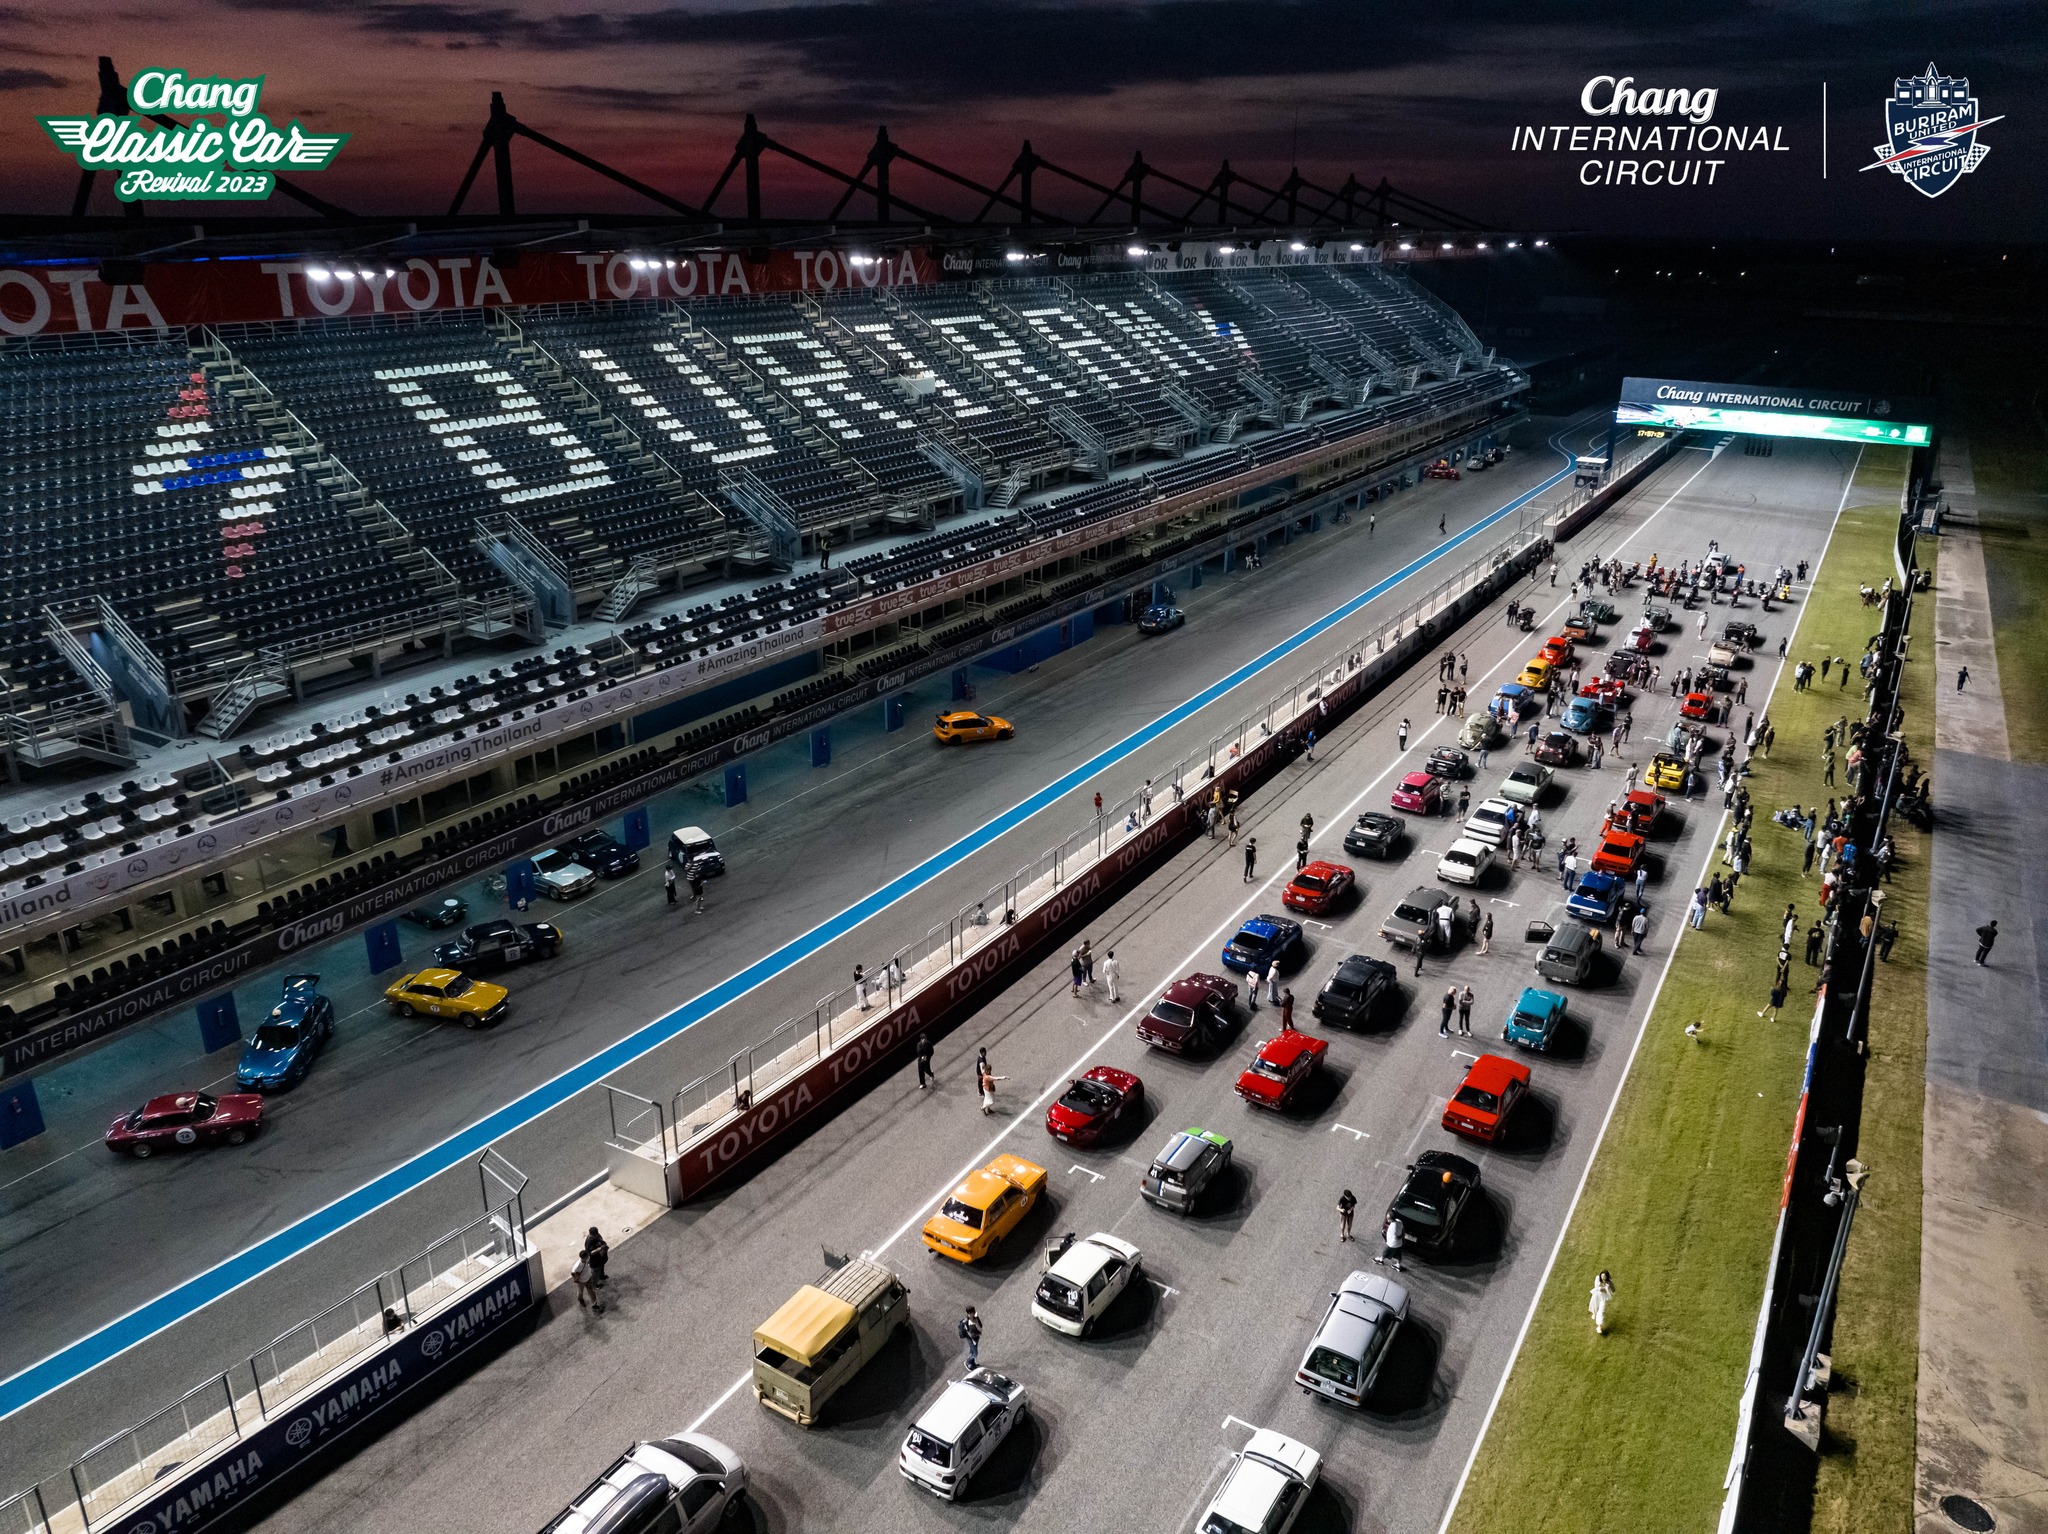 MUST SEE & MUST JOIN : Chang Arena & Chang International Circuit